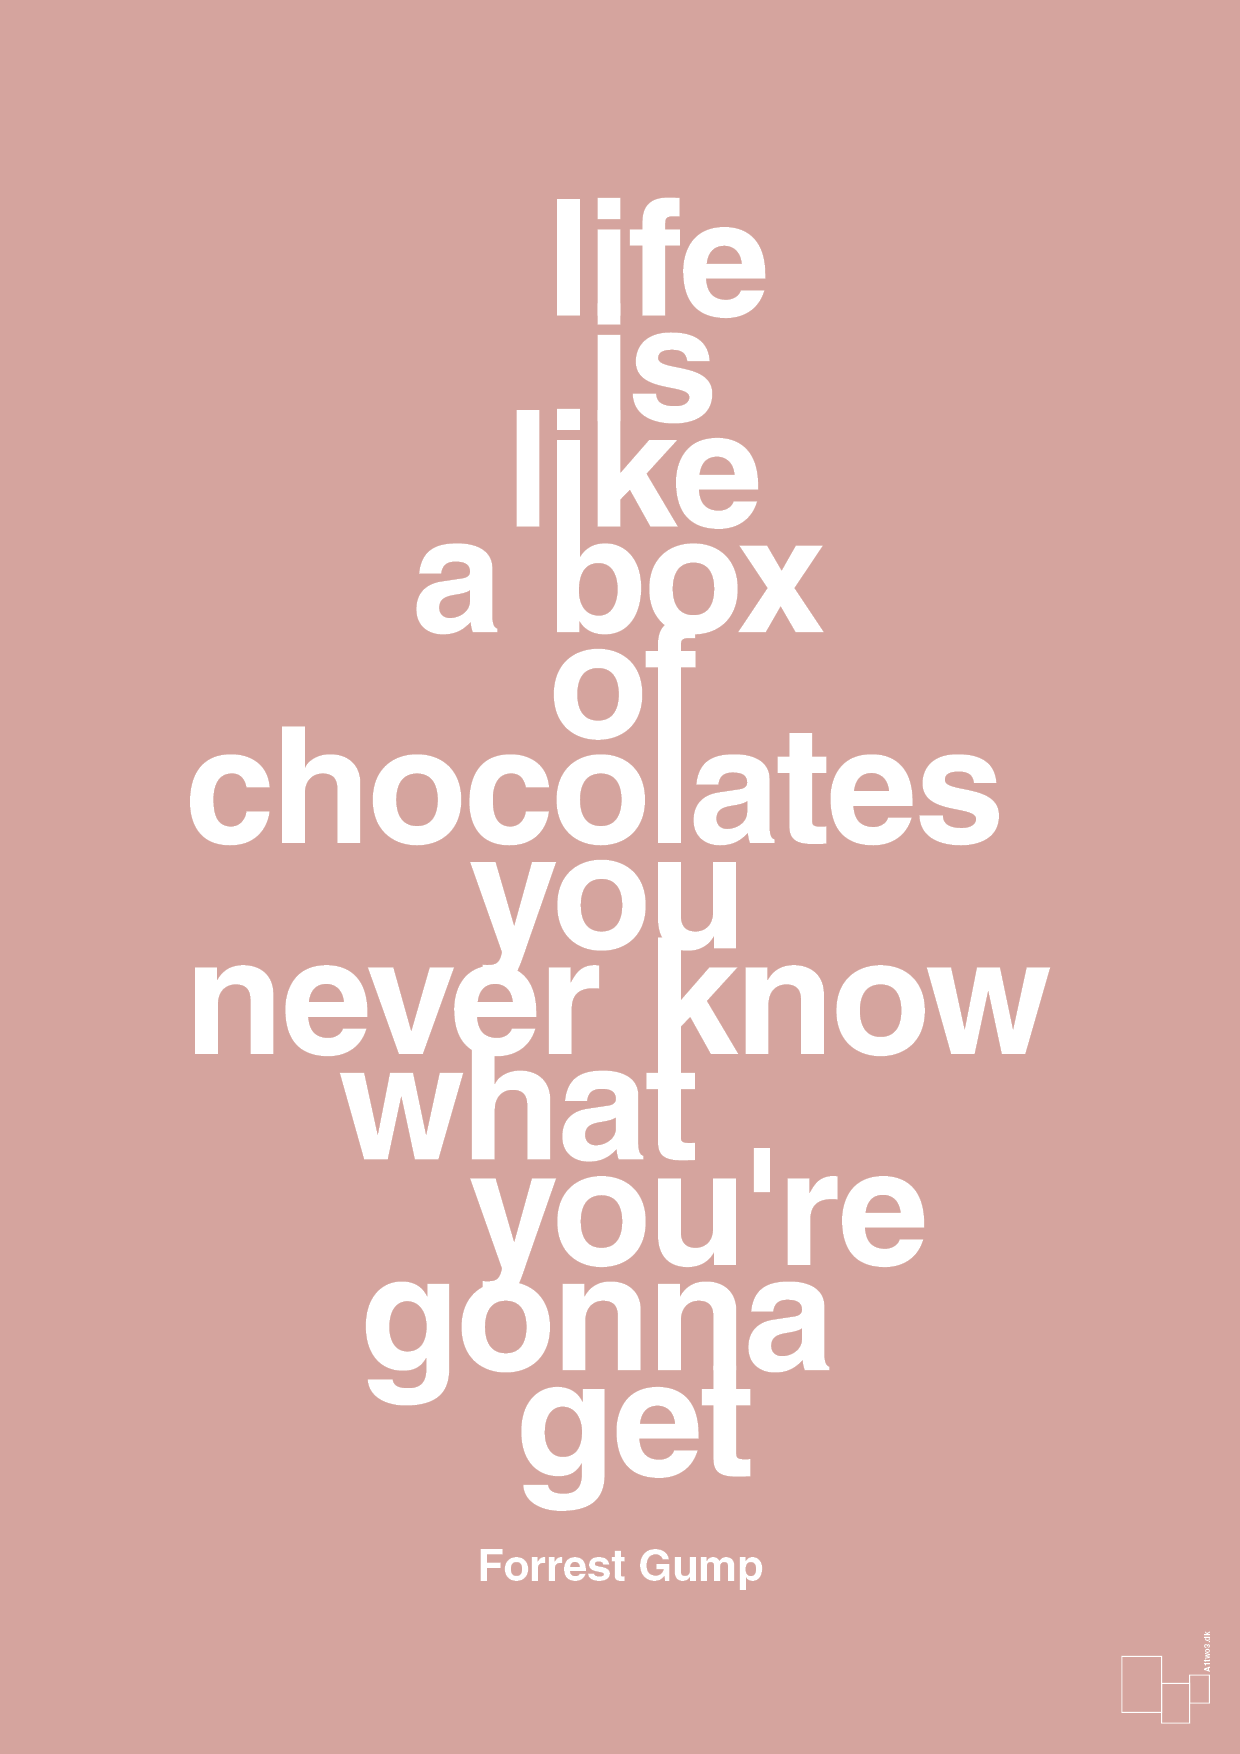 life is like a box of chocolates you never know what you're gonna get - Plakat med Citater i Bubble Shell